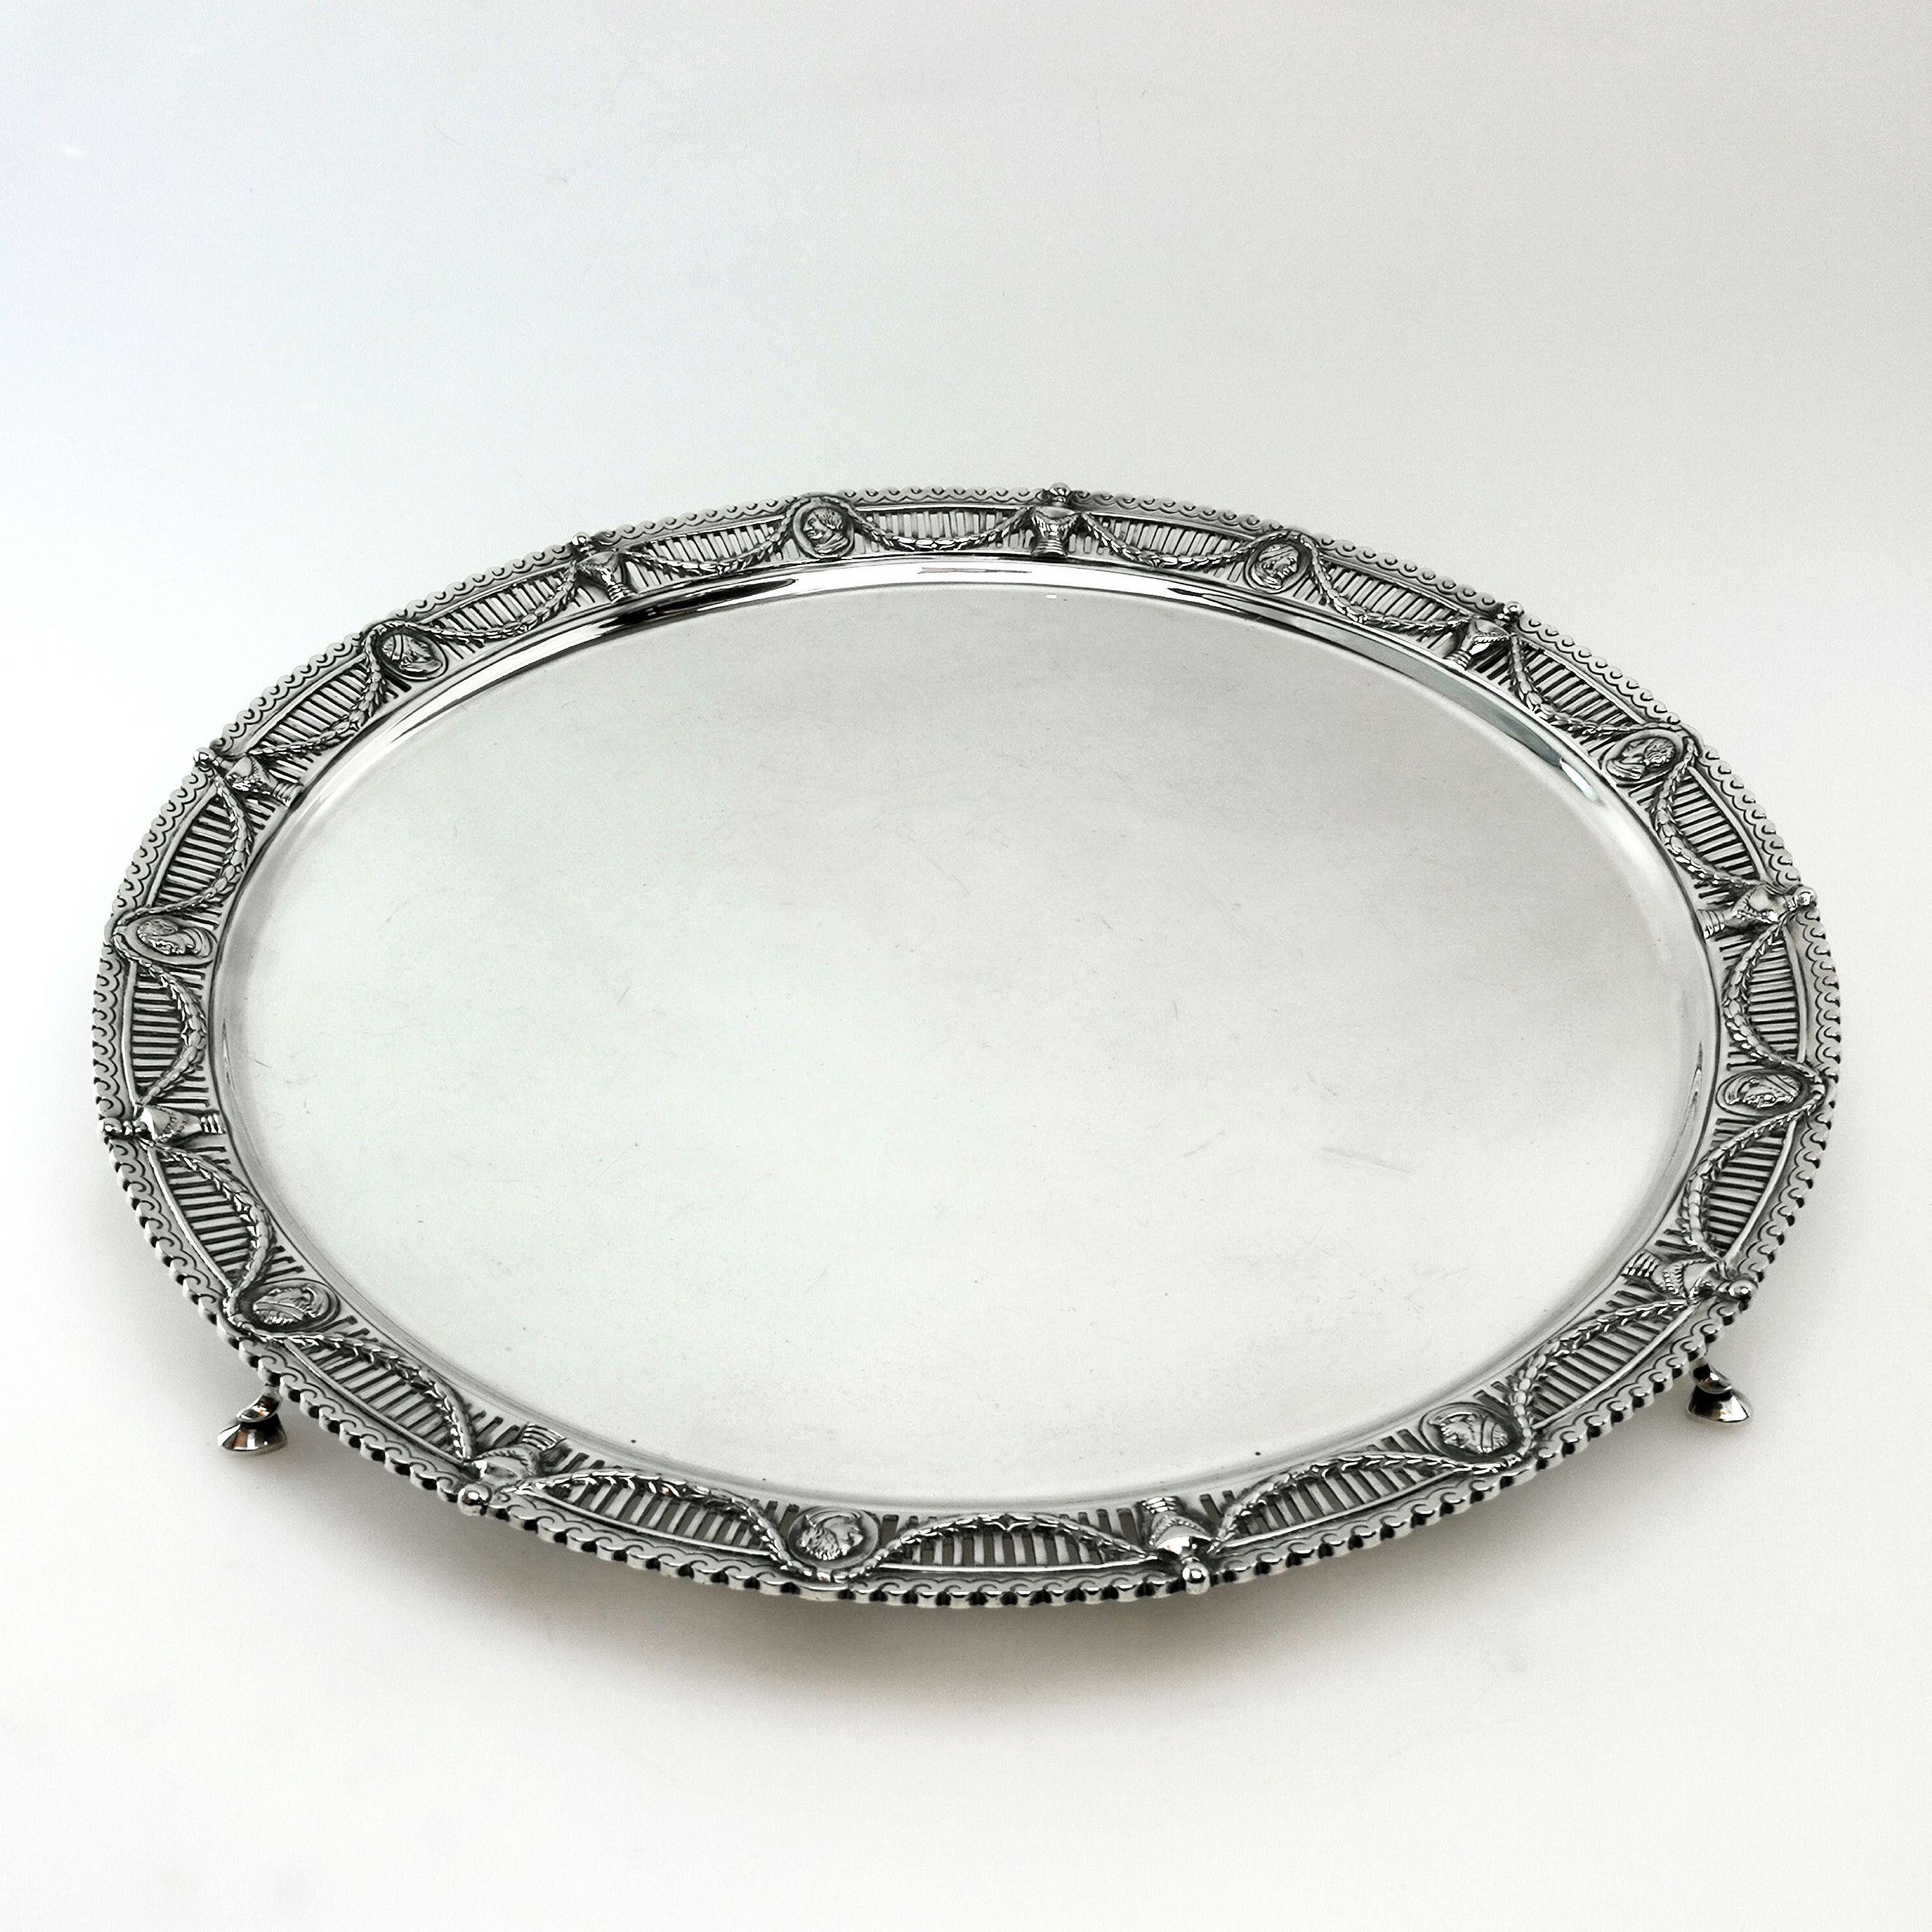 A magnificent Antique Victorian solid Silver Salver. This round Silver Tray stands on four hoof feet and has an impressive rim featuring a pierced pattern embellished with a swag design and interspersed with oval cartouches filled with classical